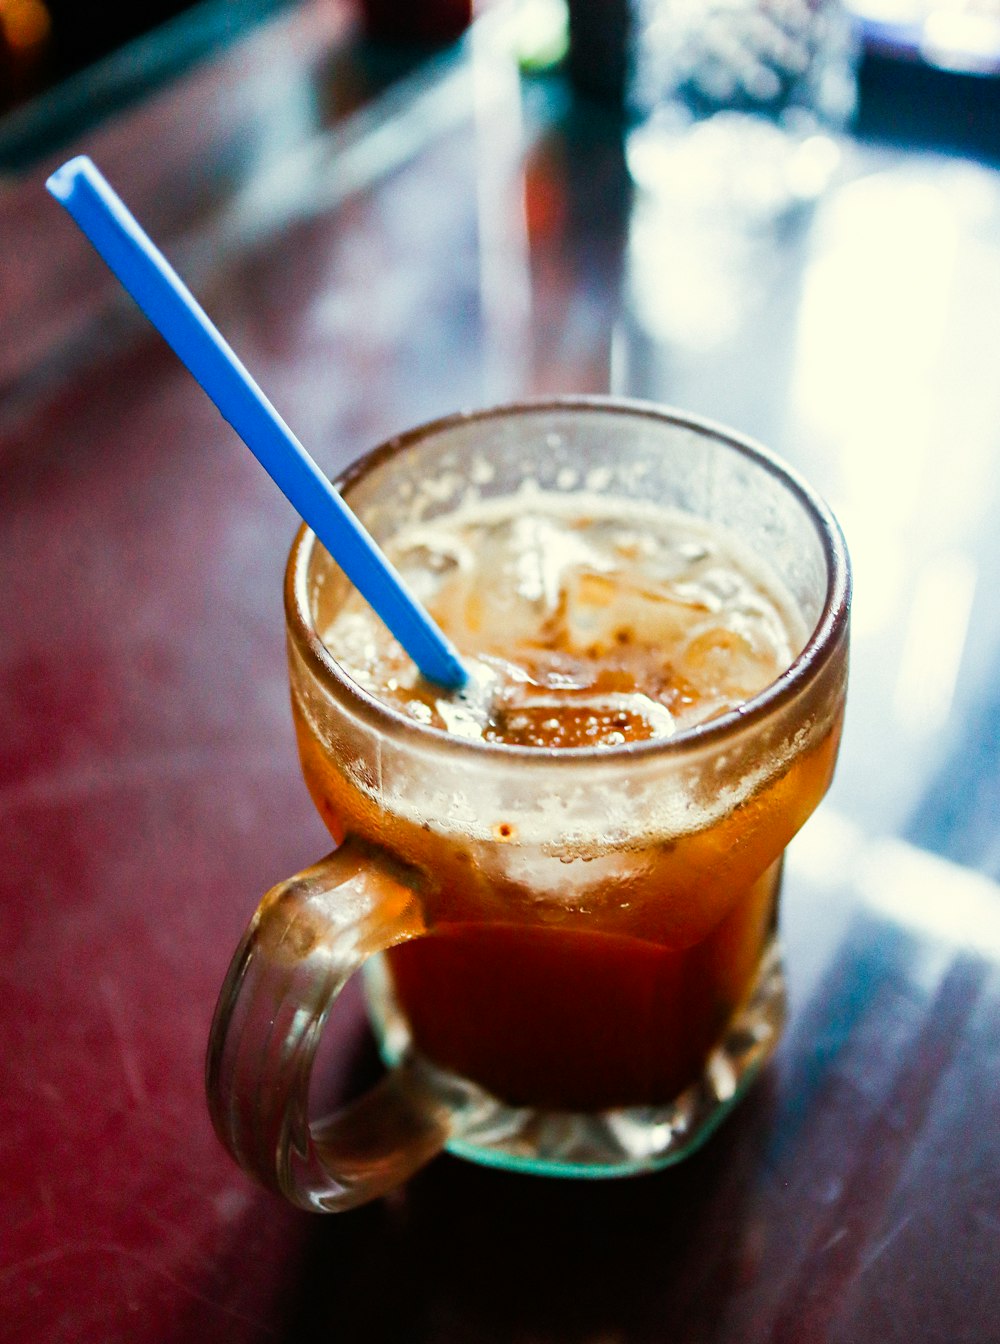 a glass of iced tea with a blue straw